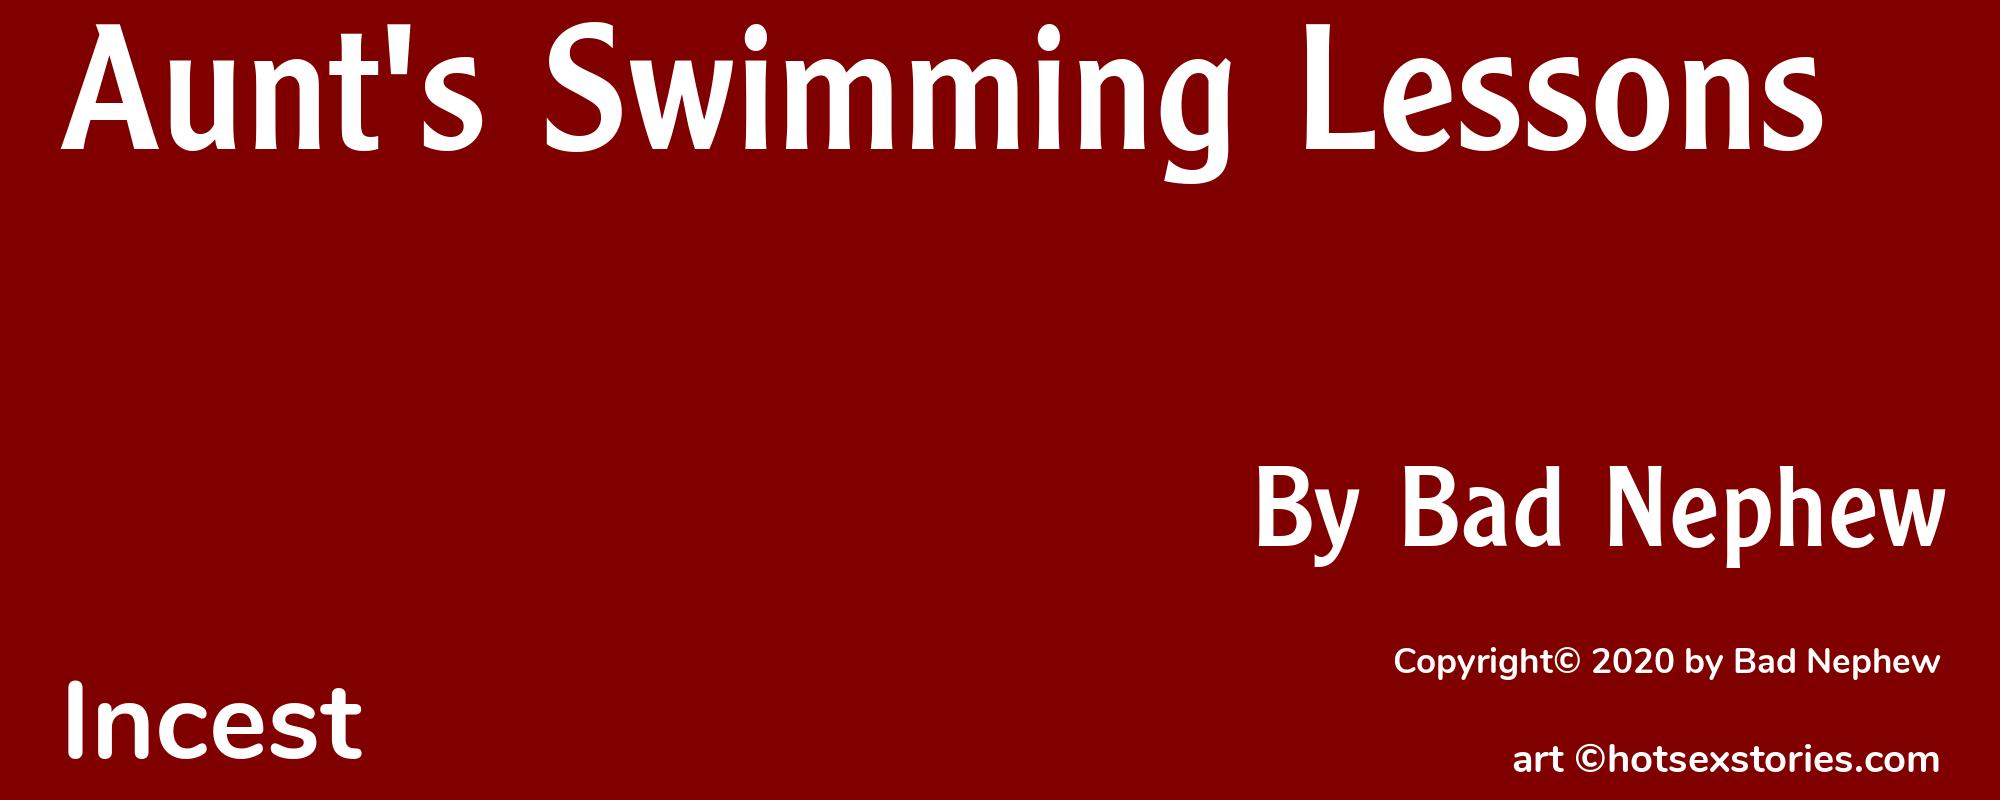 Aunt's Swimming Lessons - Cover